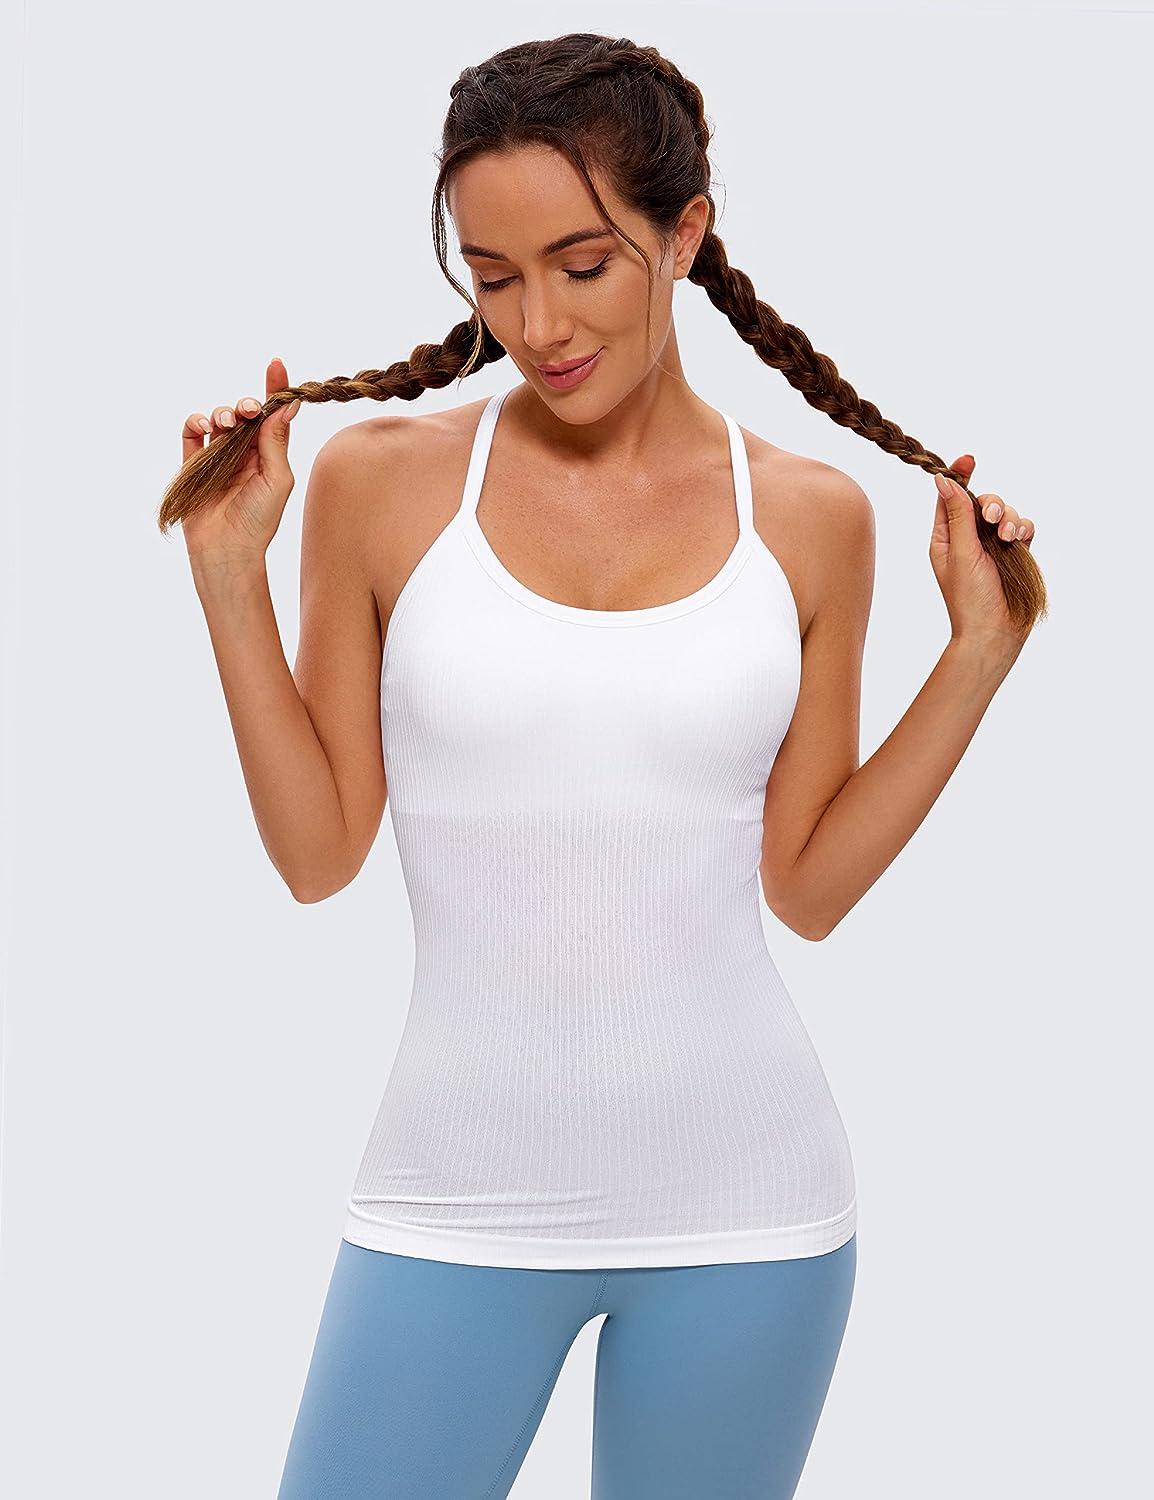 Camisoles & Tanks Womens Tank Tops Ribbed Seamless Workout Exercise Shirts  Yoga Top Women Lace Cotton For Camisole Slip From Strawberry22, $4.75